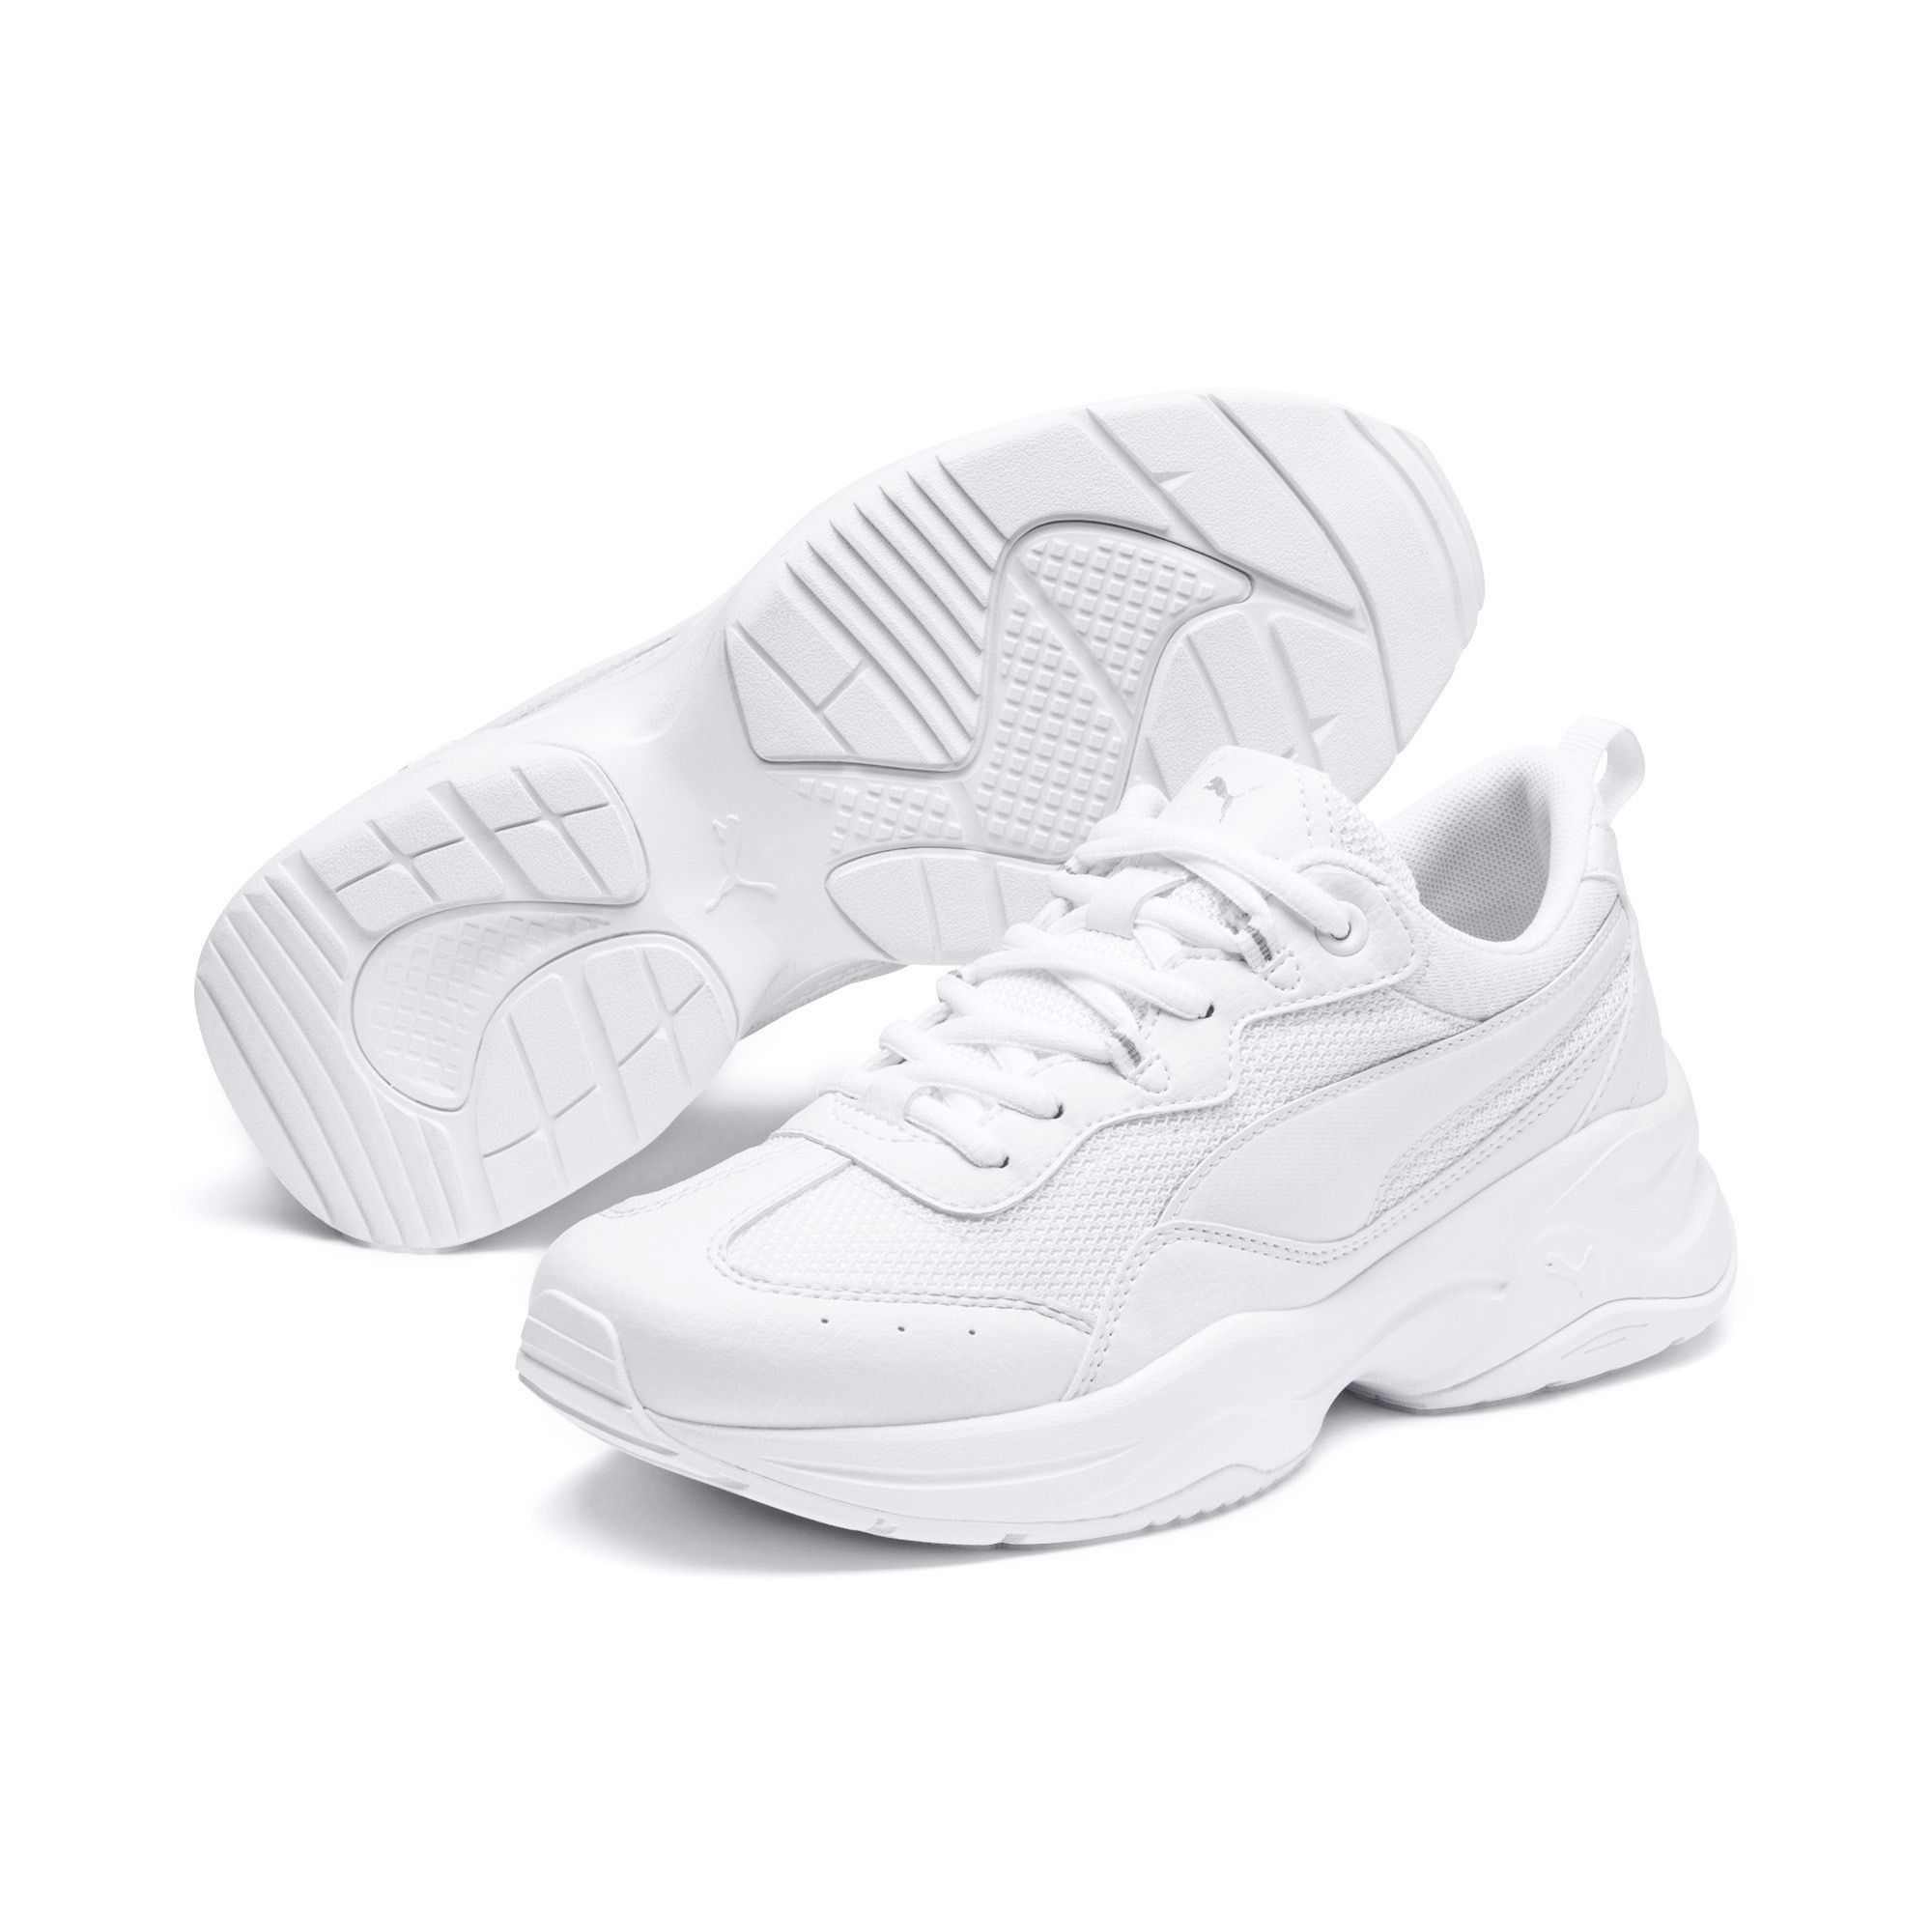  With their chunky silhouette and overlay details on the upper, these kicks look like they just stepped out of an industrial-inspired dance video. And with a boatload of features and tech incorporated, they certainly wouldn’t be out of place on a dancer’s feet. The IMEVA midsole offers supreme cushioning and support, and the SoftFoam+ sockliner takes the comfort factor up a notch, offering a plush ride with every step. The rubber outsole helps prevent slips and sliding. FEATURES & BENEFITS IMEVA: PUMA's midsole for a lightweight and comfortable feelSoftFoam+: PUMA's comfort sockliner for instant step-in and long-lasting comfort that provides soft cushioning every step of your day DETAILS Mesh and synthetic upperRubber outsole for gripLace closure for a snug fitPUMA Cat Logo on the tongue and at heel